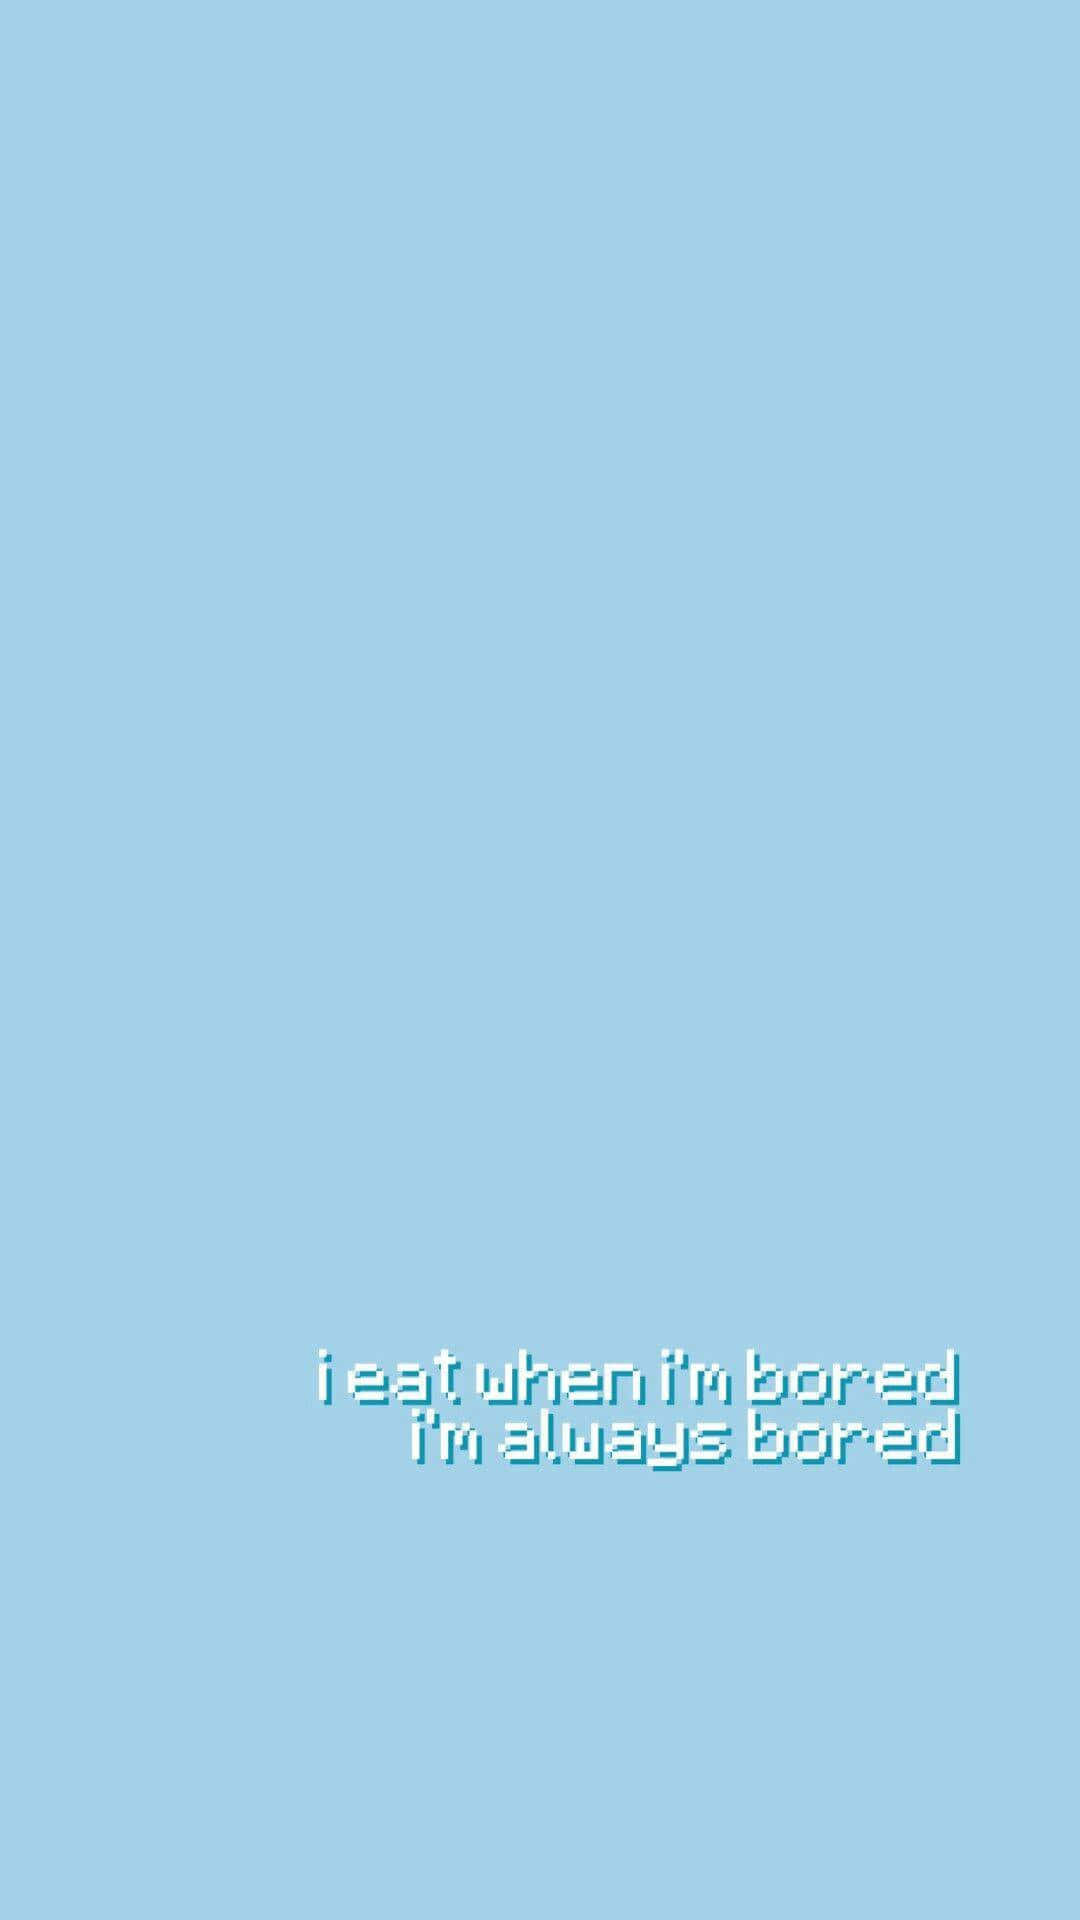 A Blue Background With The Words'the Edward Edward Edward Edward Edward Ed Background